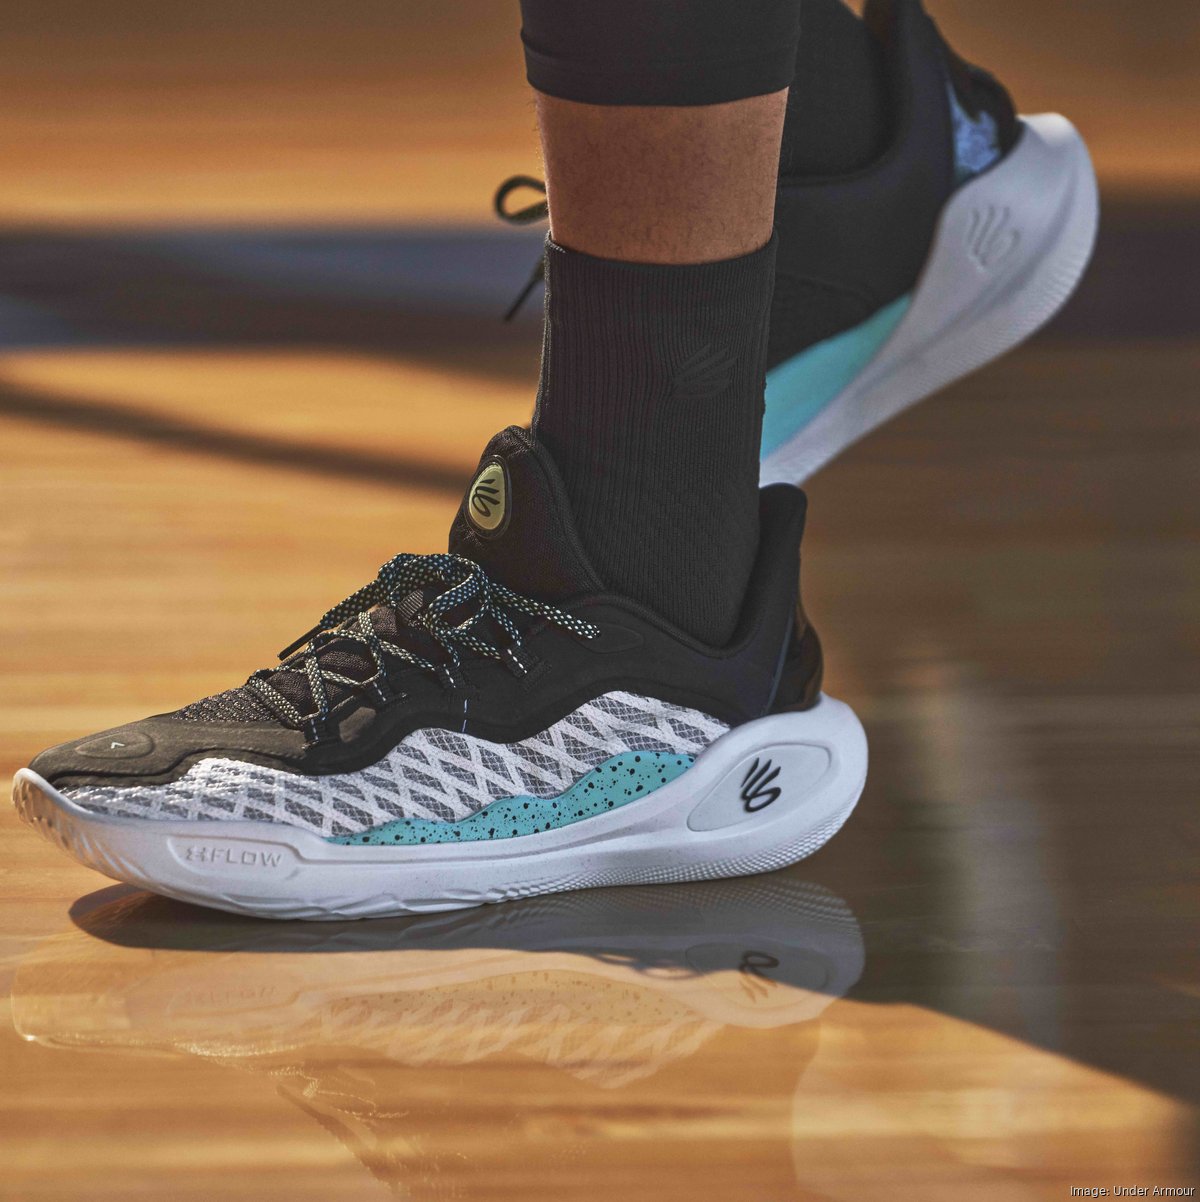 Stephen Curry Debuts Two New Colorways of Signature Shoes - Sports